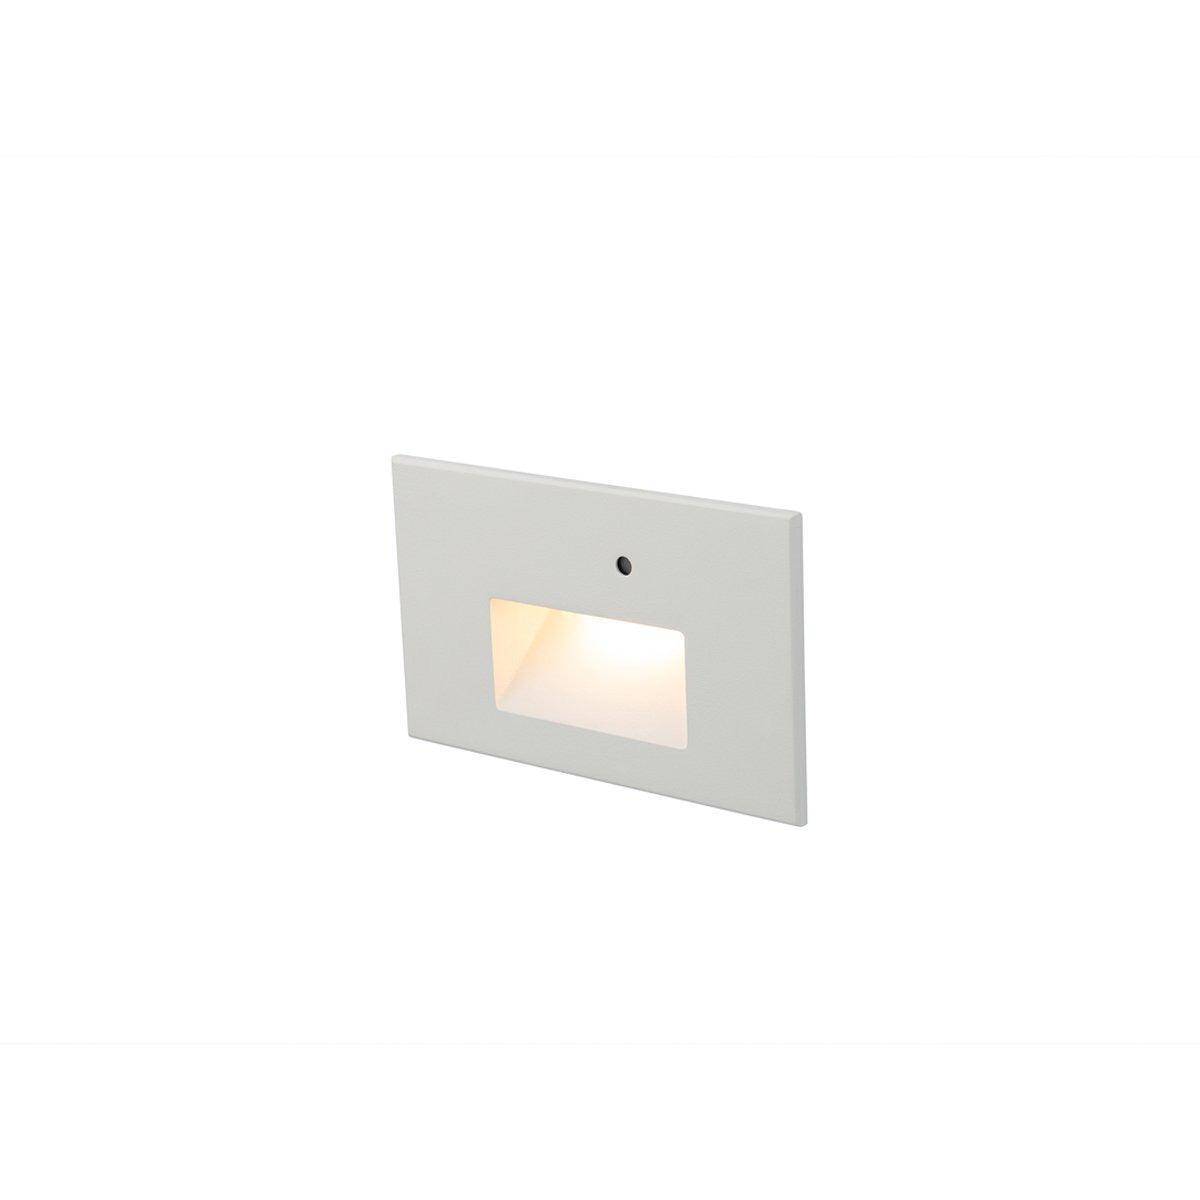 WAC Lighting - Step Light With Photocell Horizontal Anti-Microbial LED Step and Wall Light - WL-LED103-30-WT | Montreal Lighting & Hardware